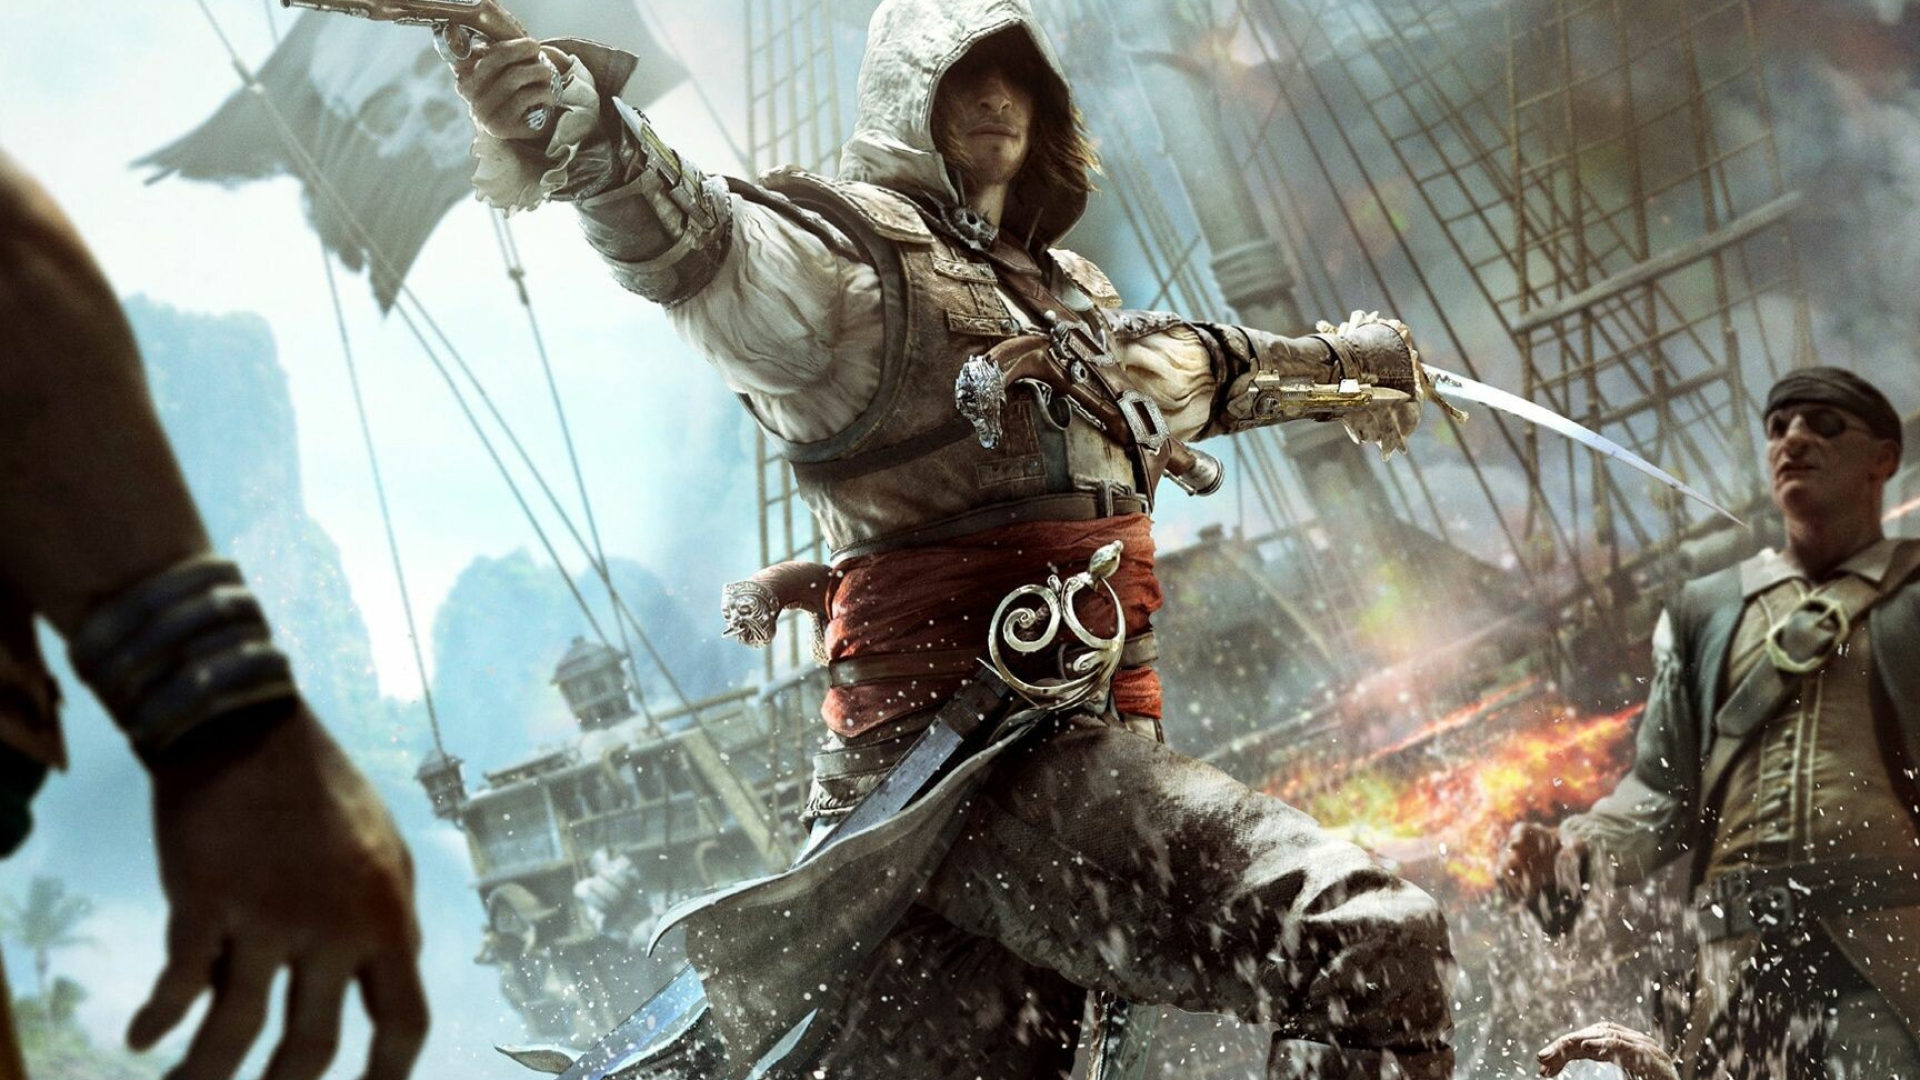 Assassin's Creed: Edward Kenway, The protagonist of the 2013 video game Black Flag. 1920x1080 Full HD Wallpaper.